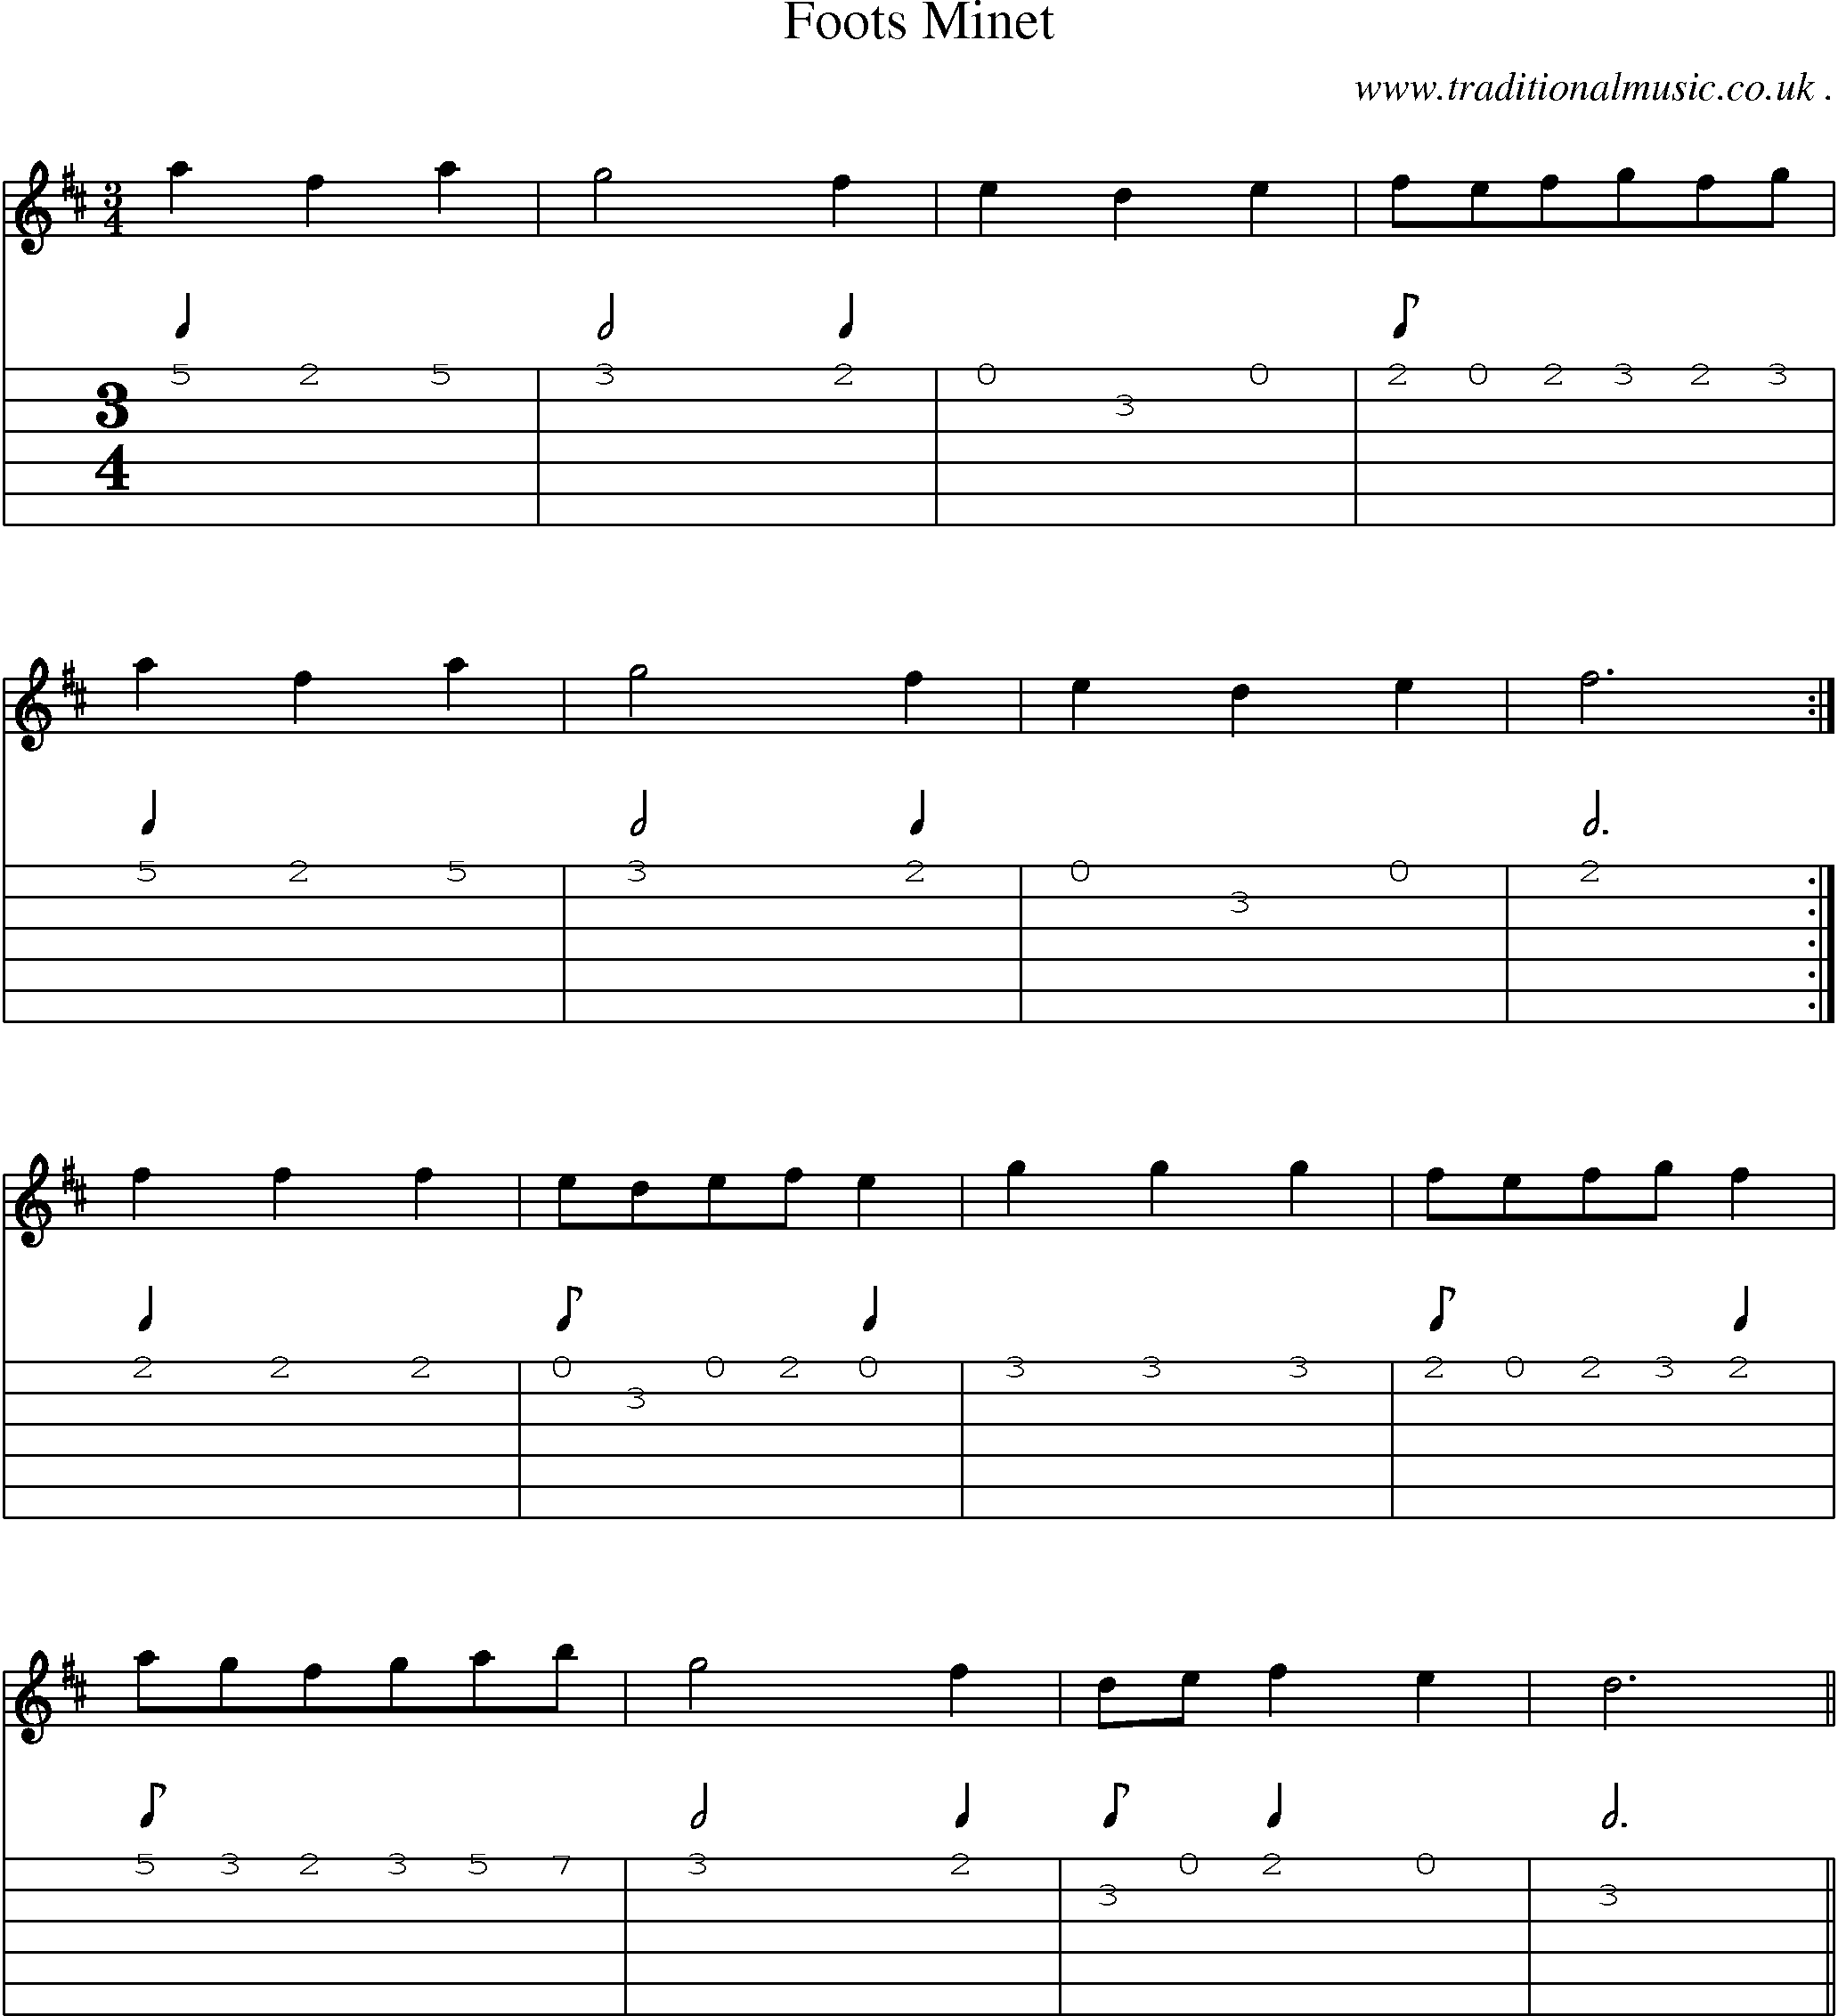 Sheet-Music and Guitar Tabs for Foots Minet